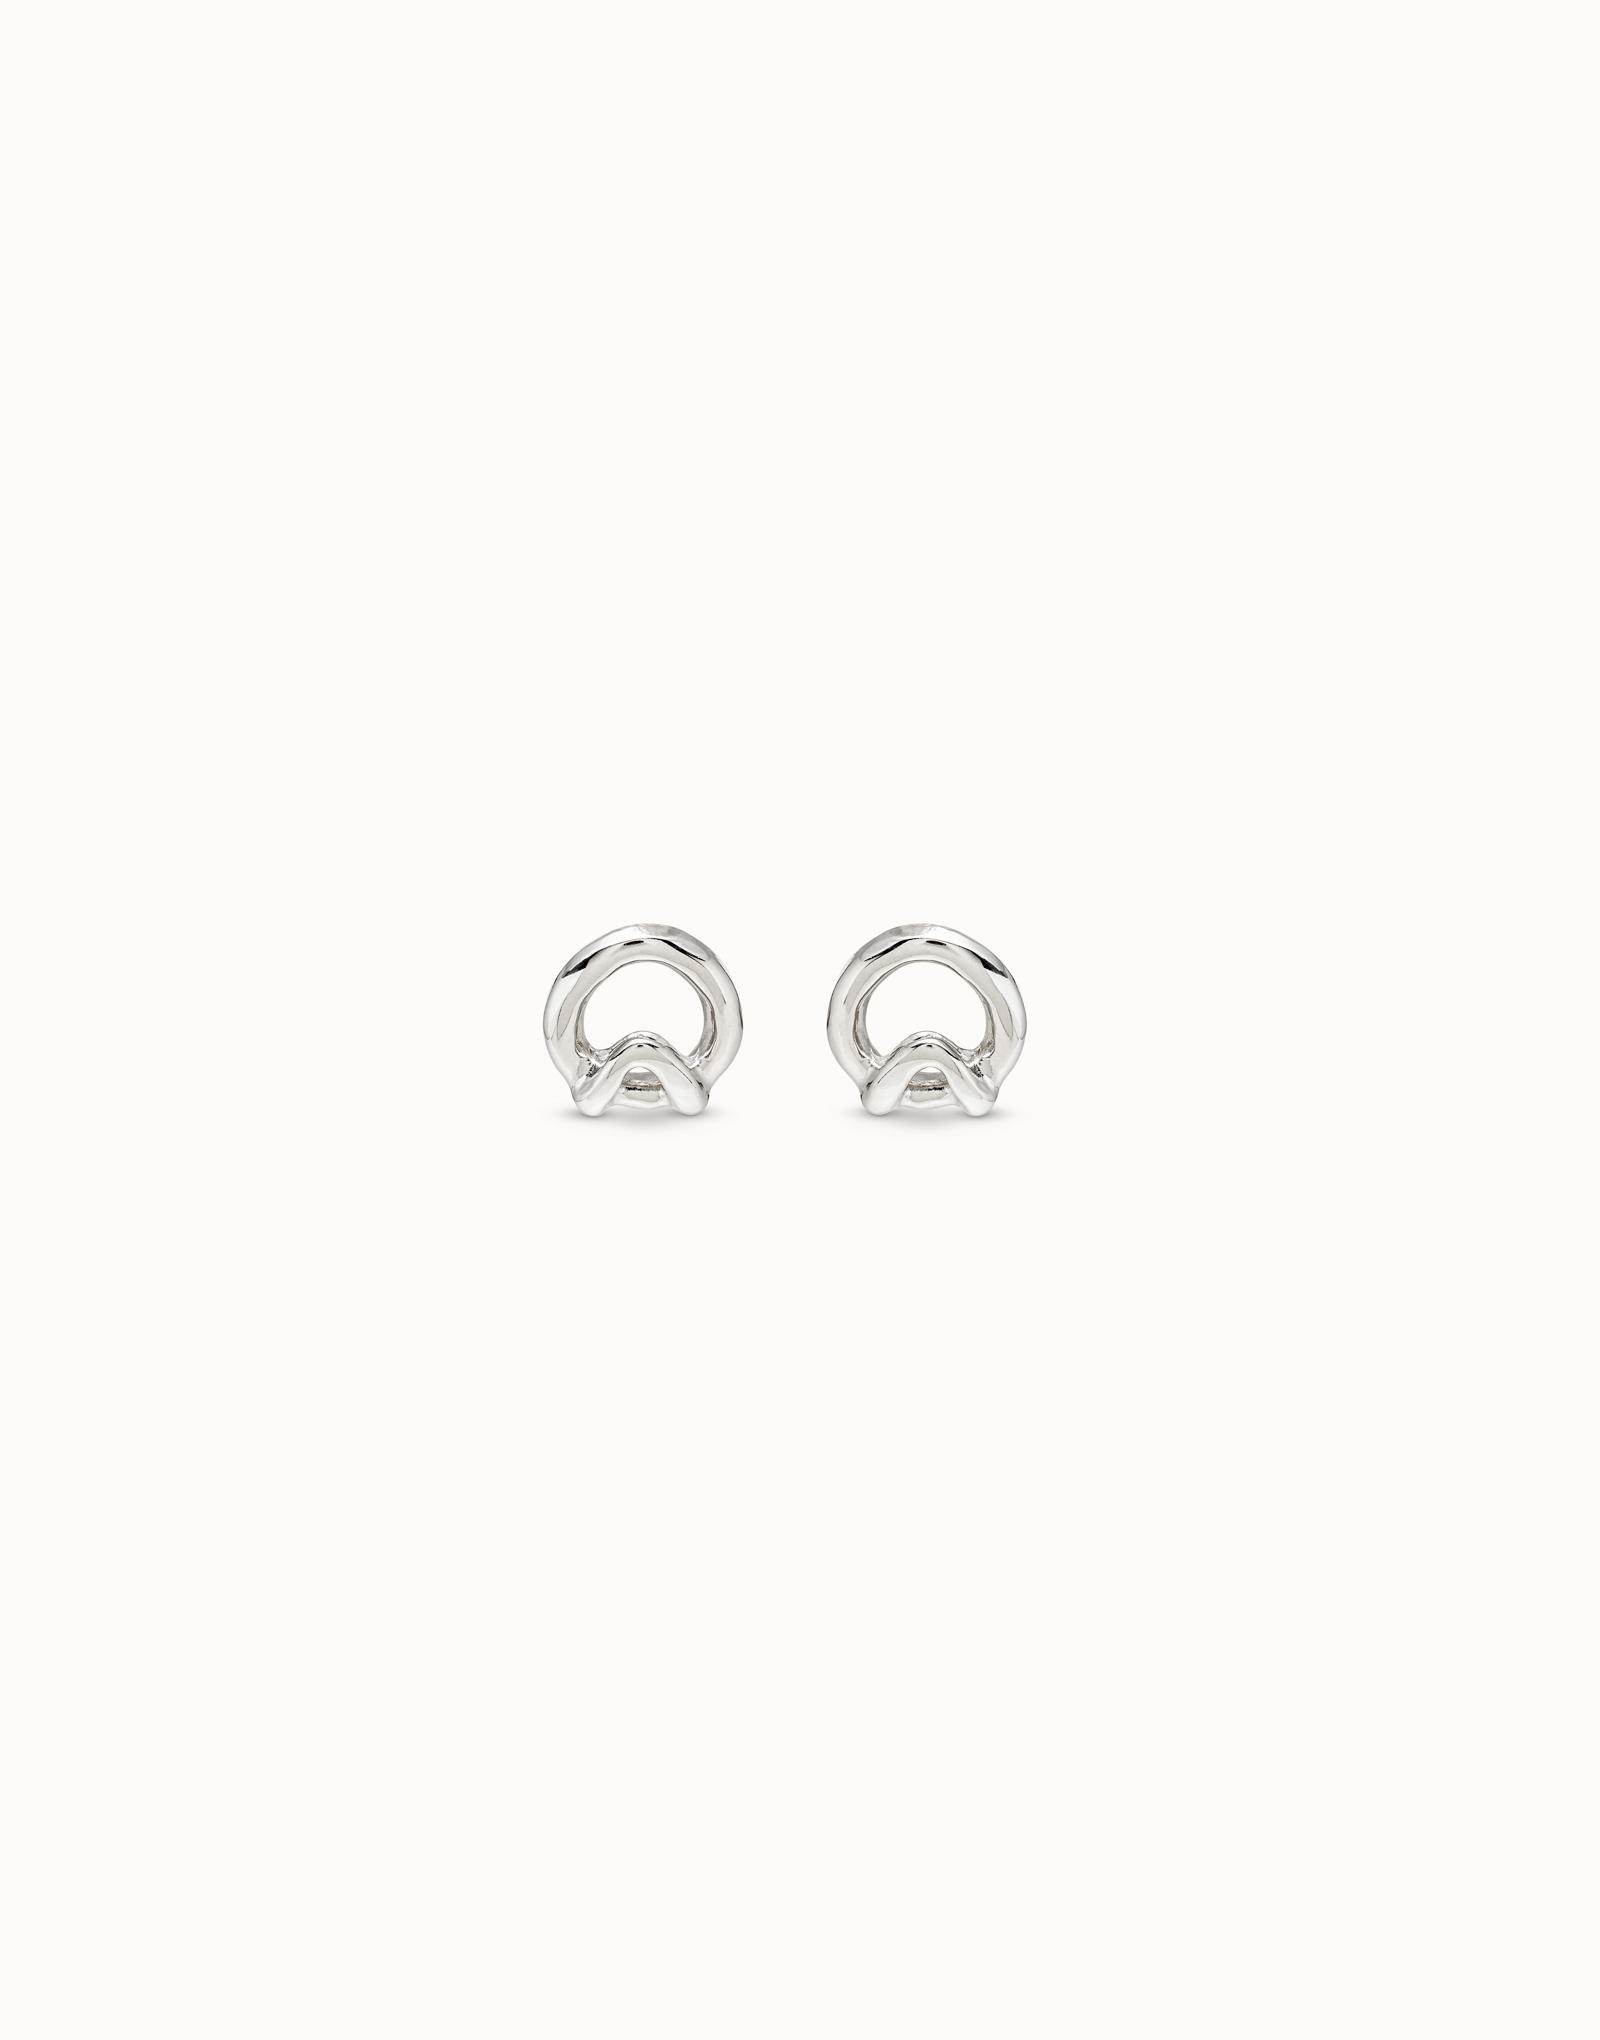 Gretchen Oval Circle Earrings Brass (Gold) – INK+ALLOY, LLC